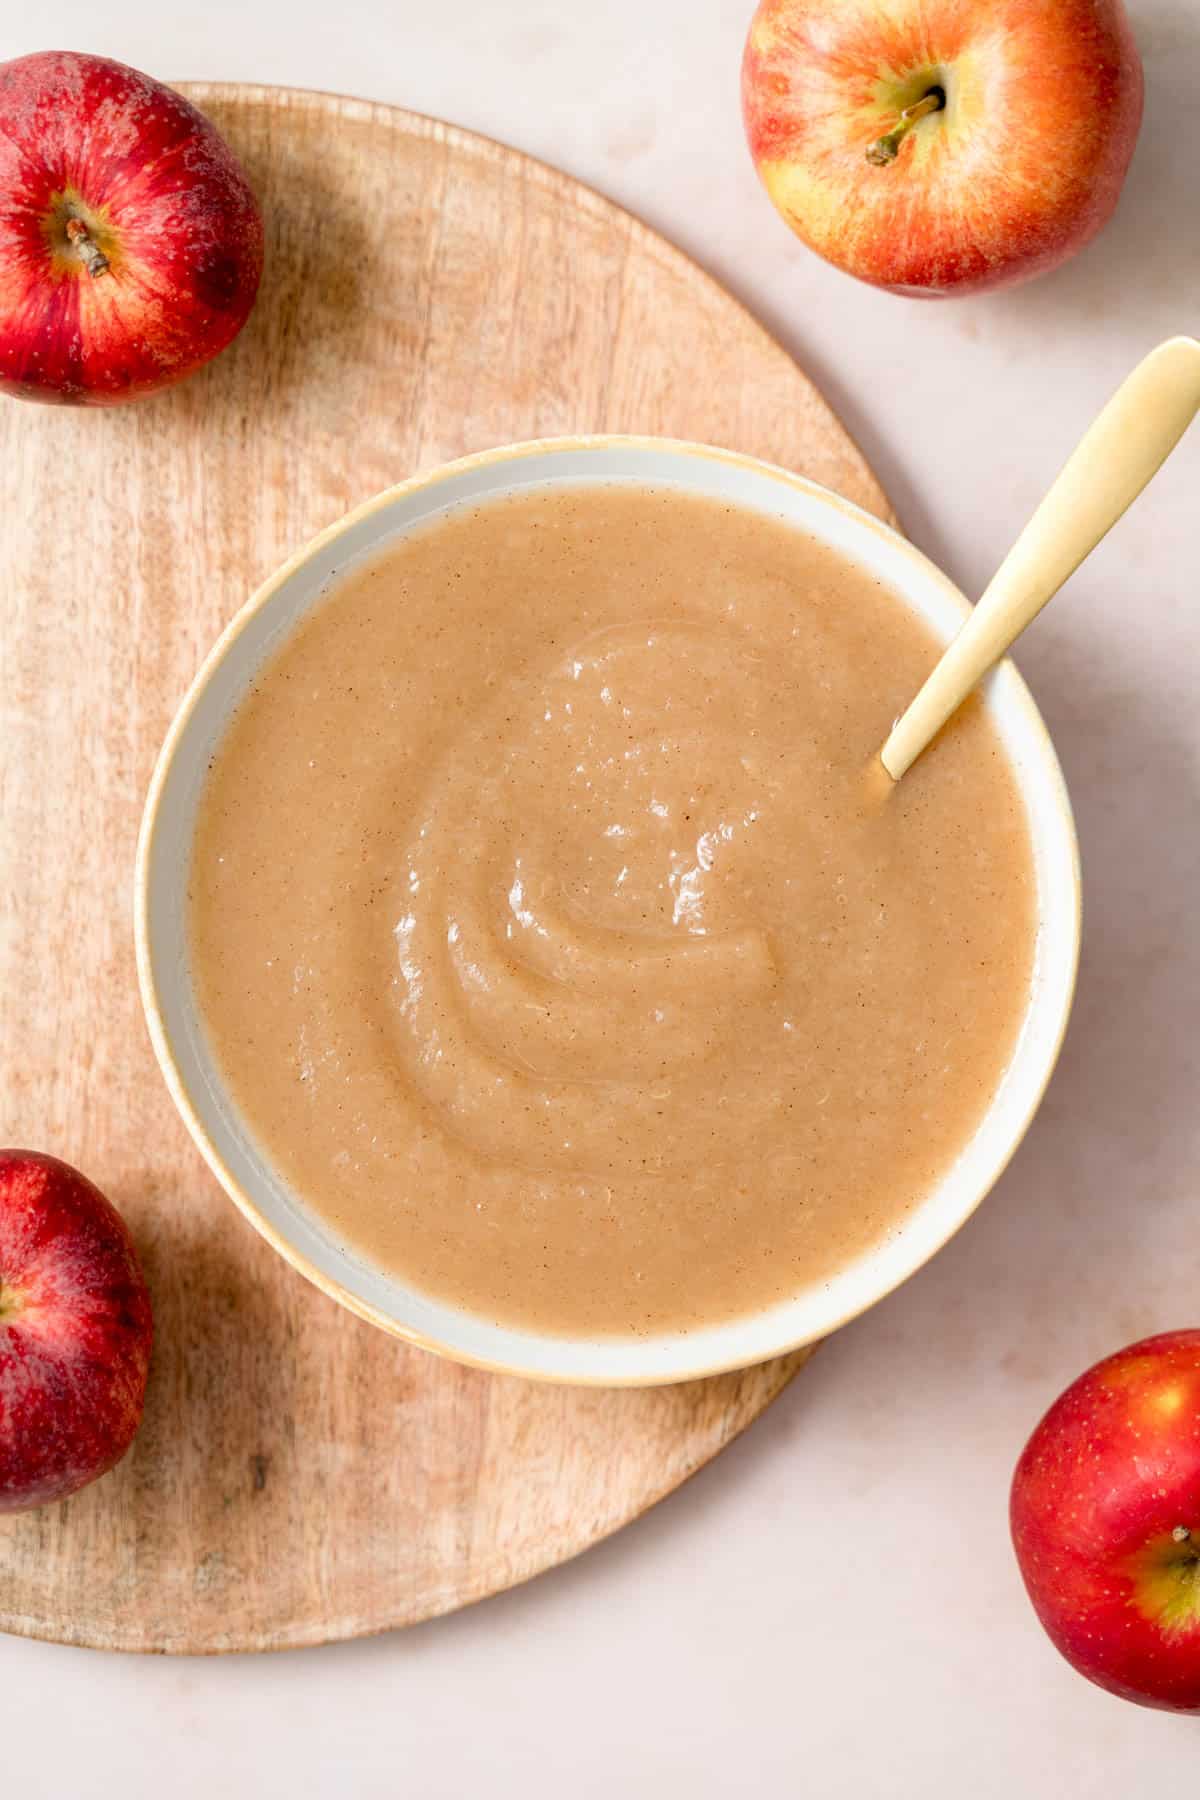 An overhead view of a bowl of unsweetened applesauce.